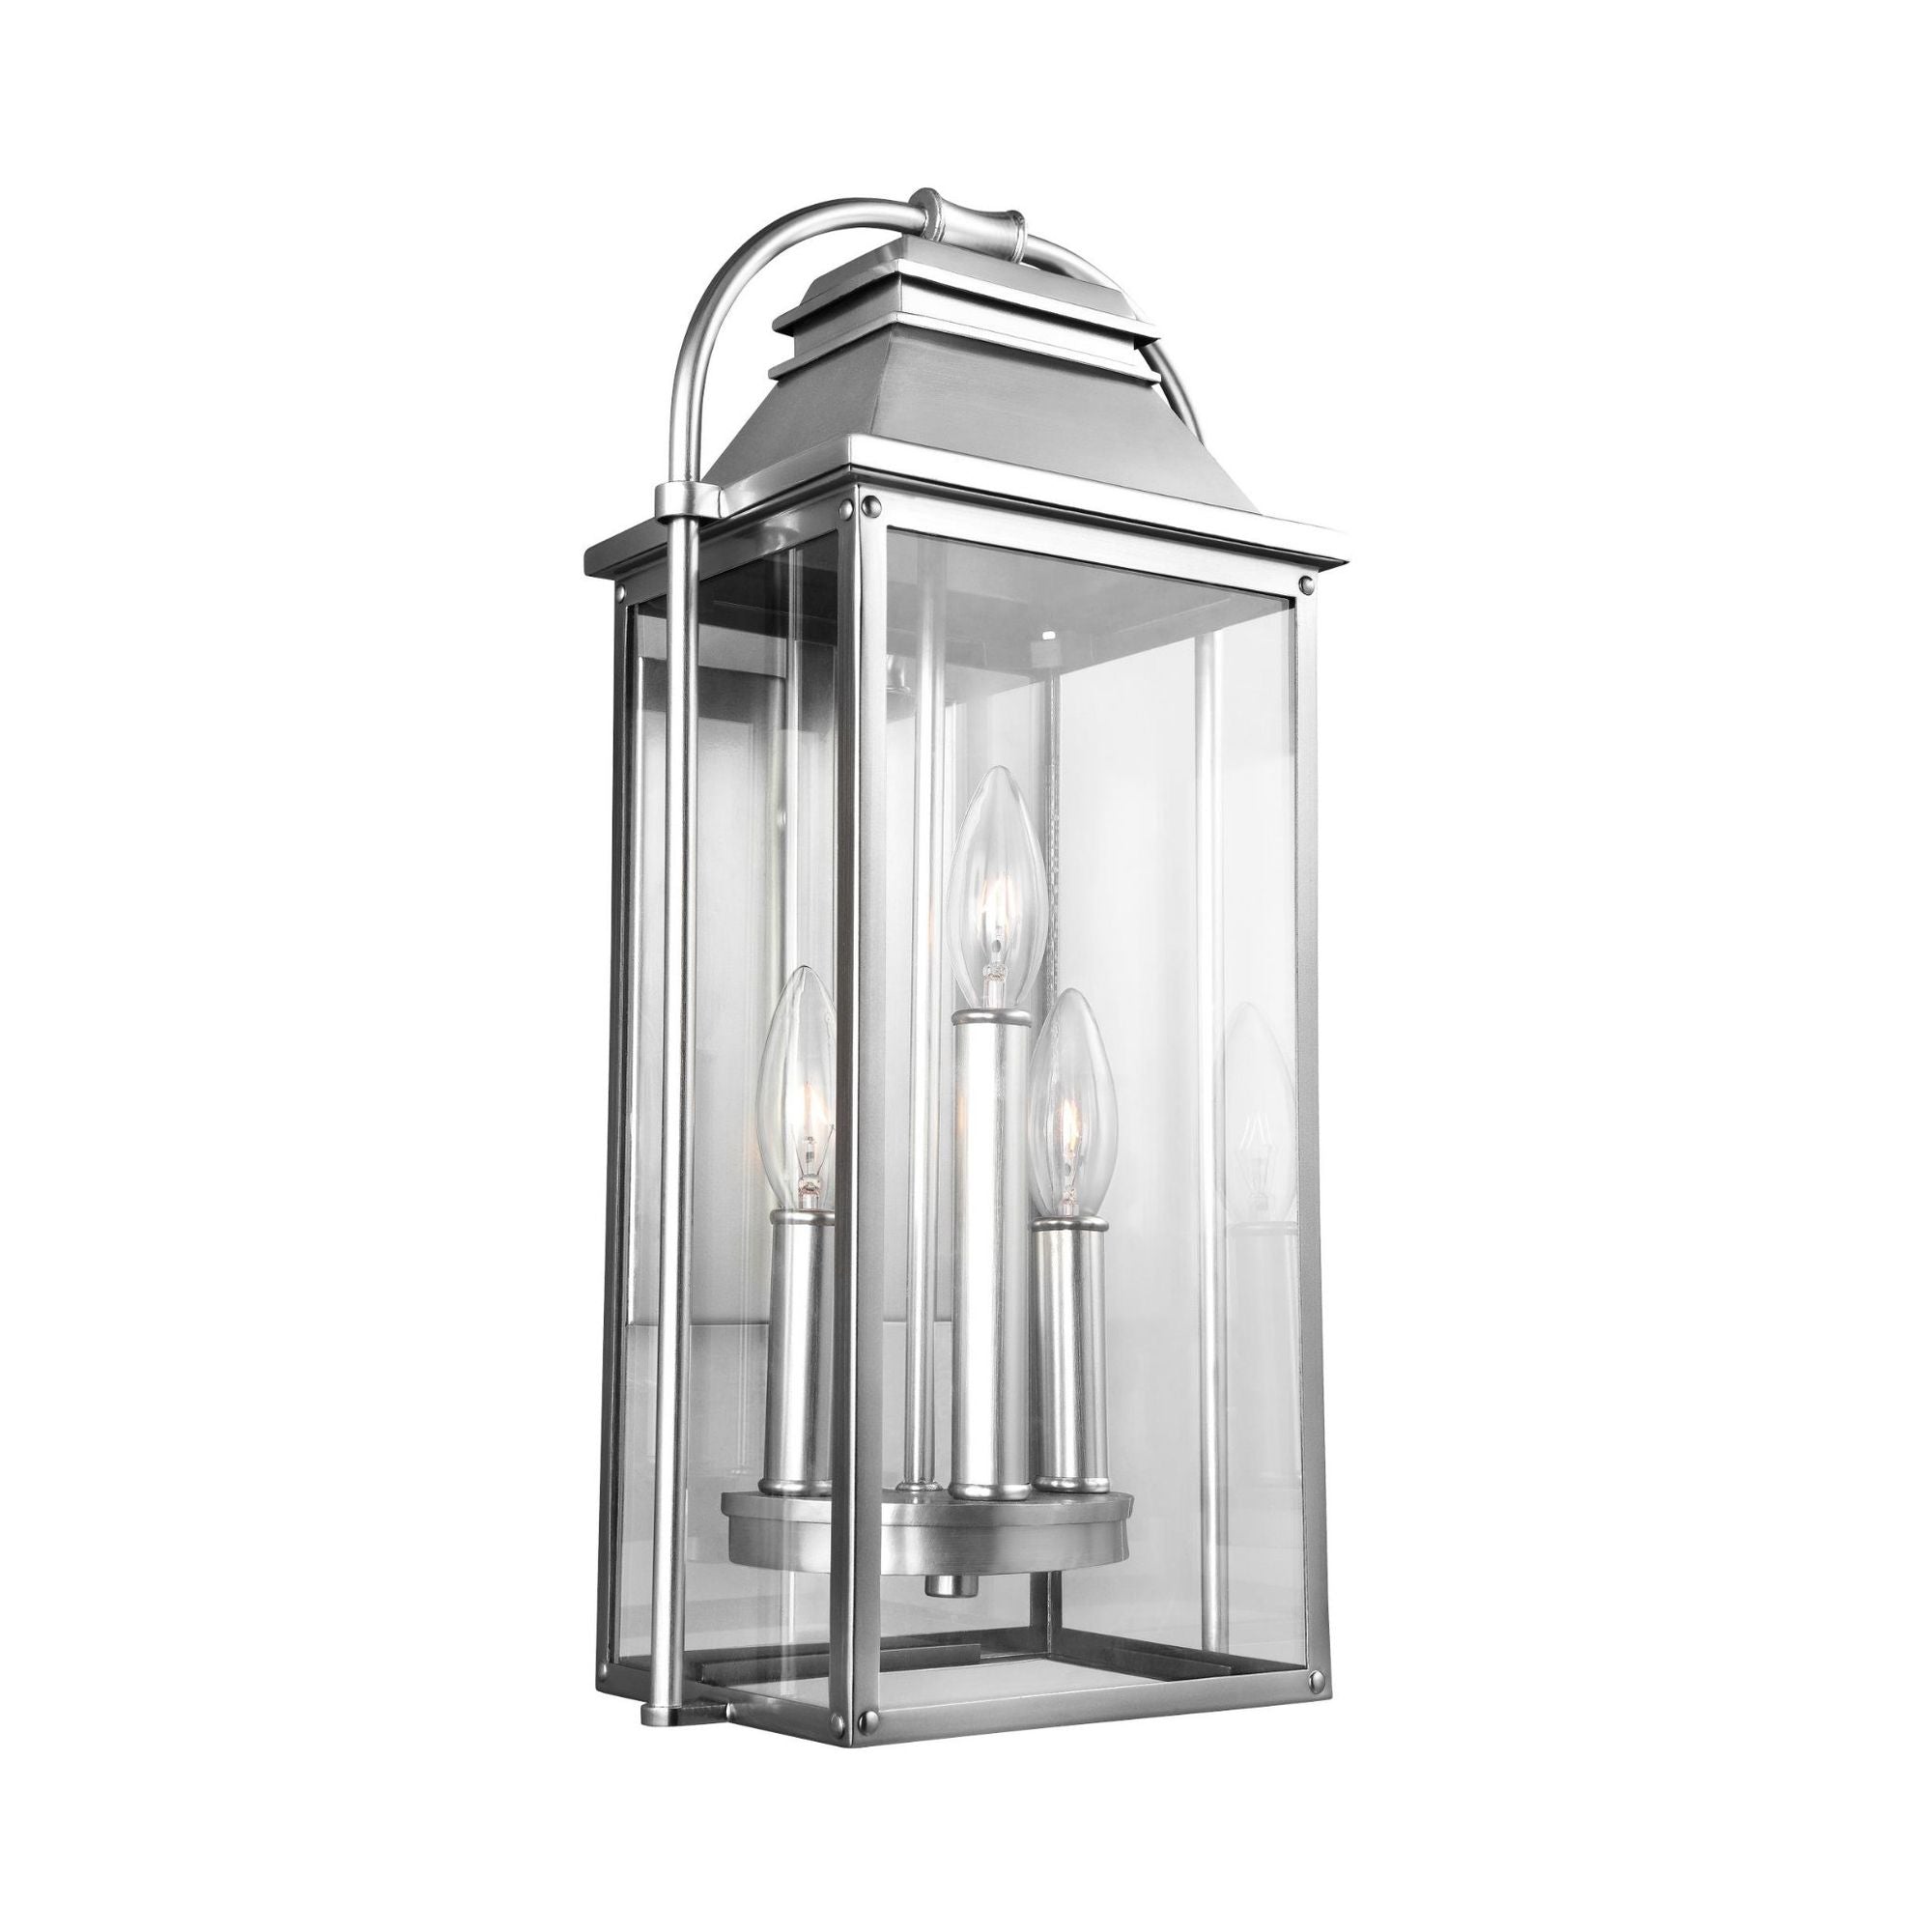 Sean Lavin Wellsworth Small Lantern in Painted Brushed Steel